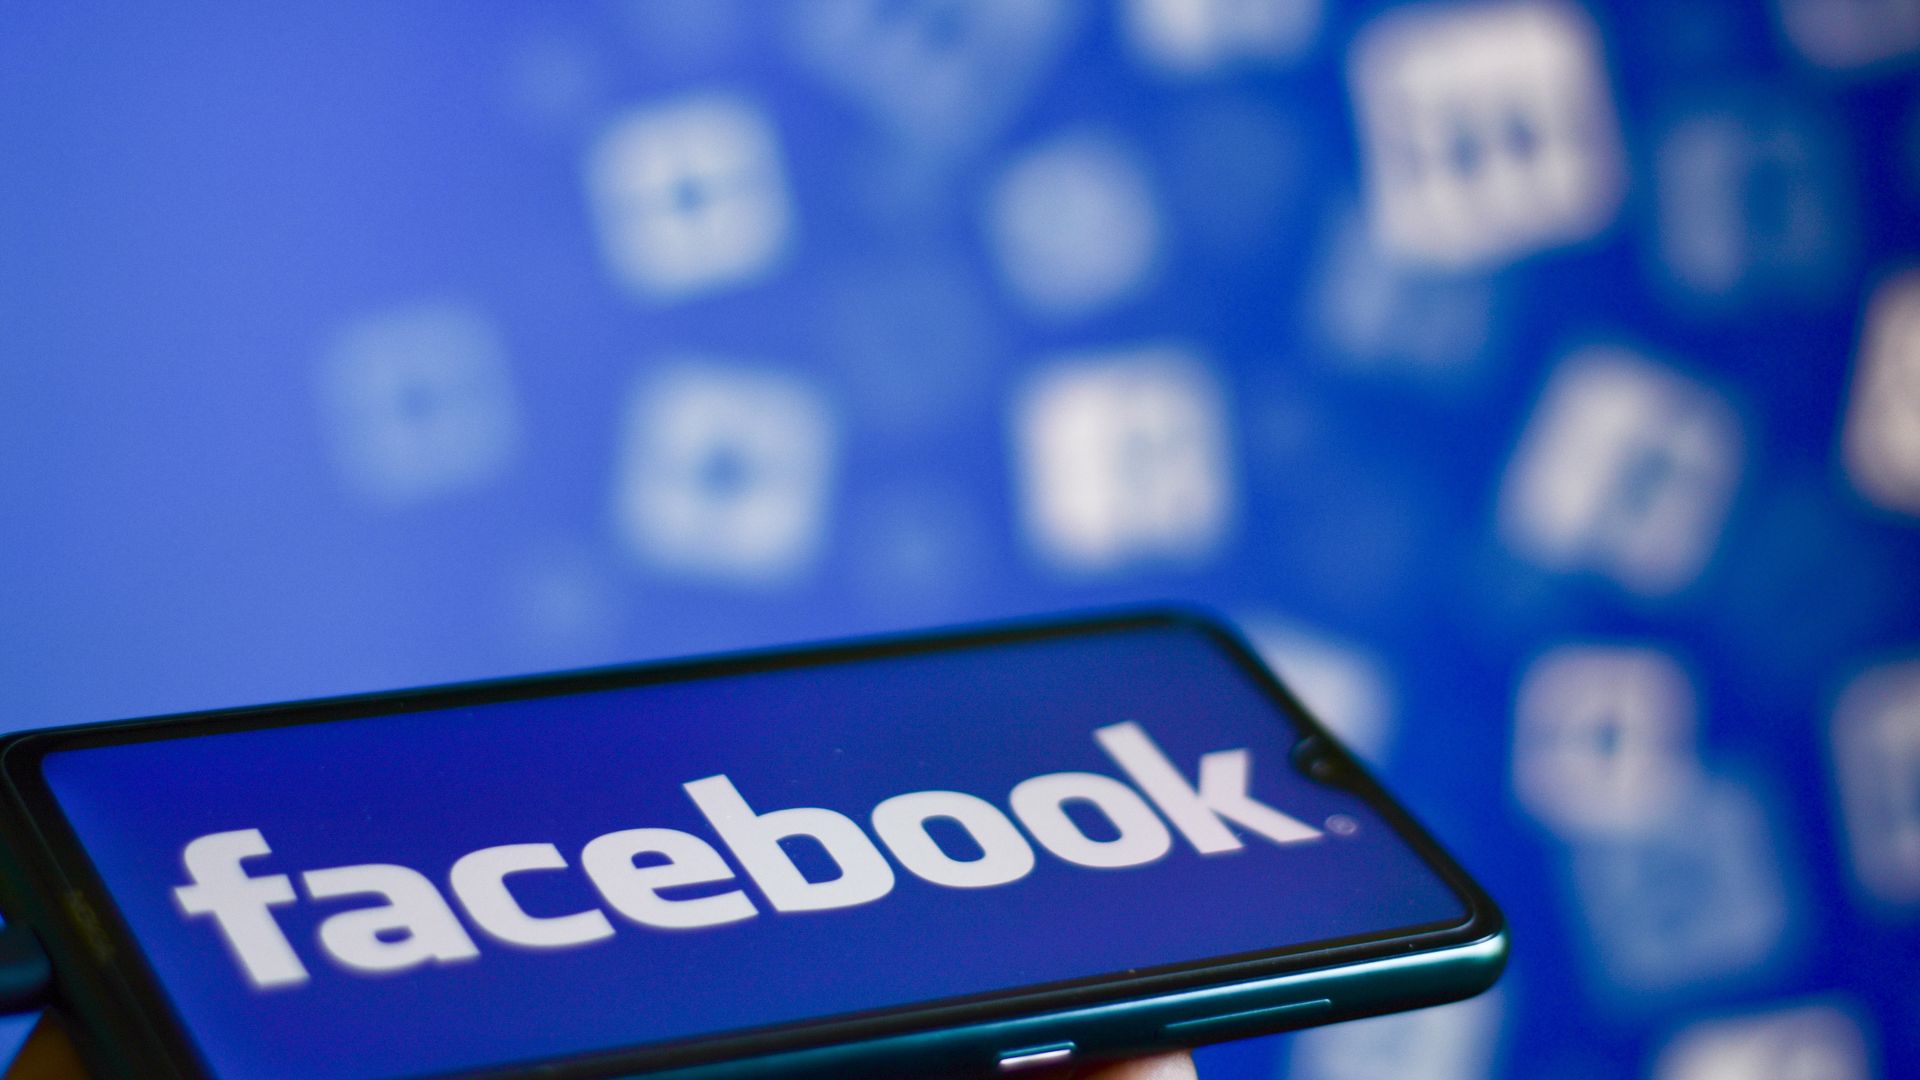 A Facebook logo is displayed on a smartphone.